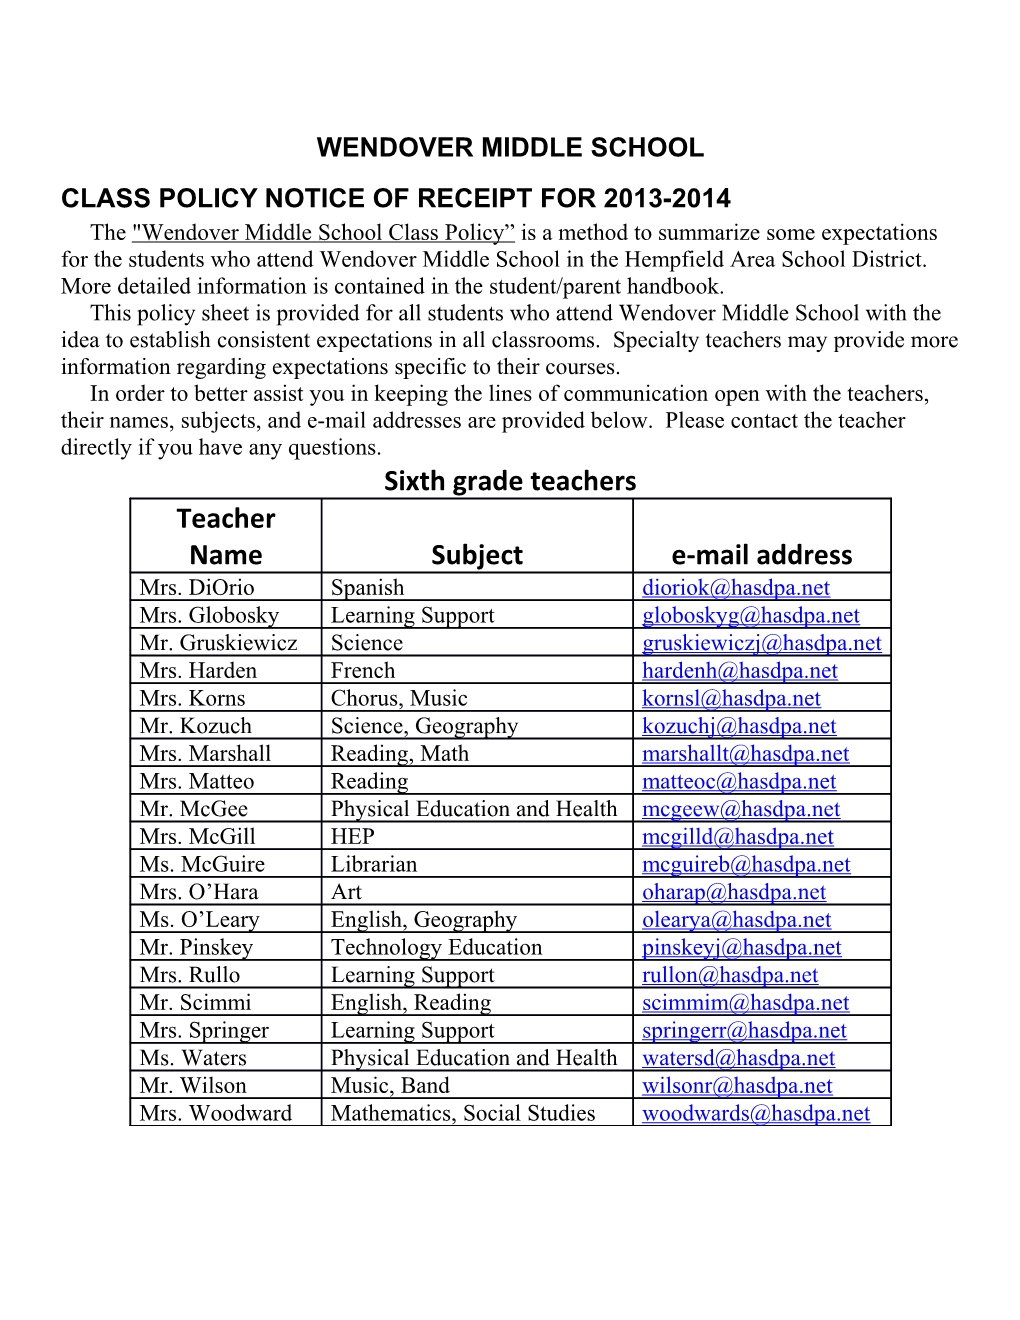 Class Policy Notice of Receipt for 2013-2014